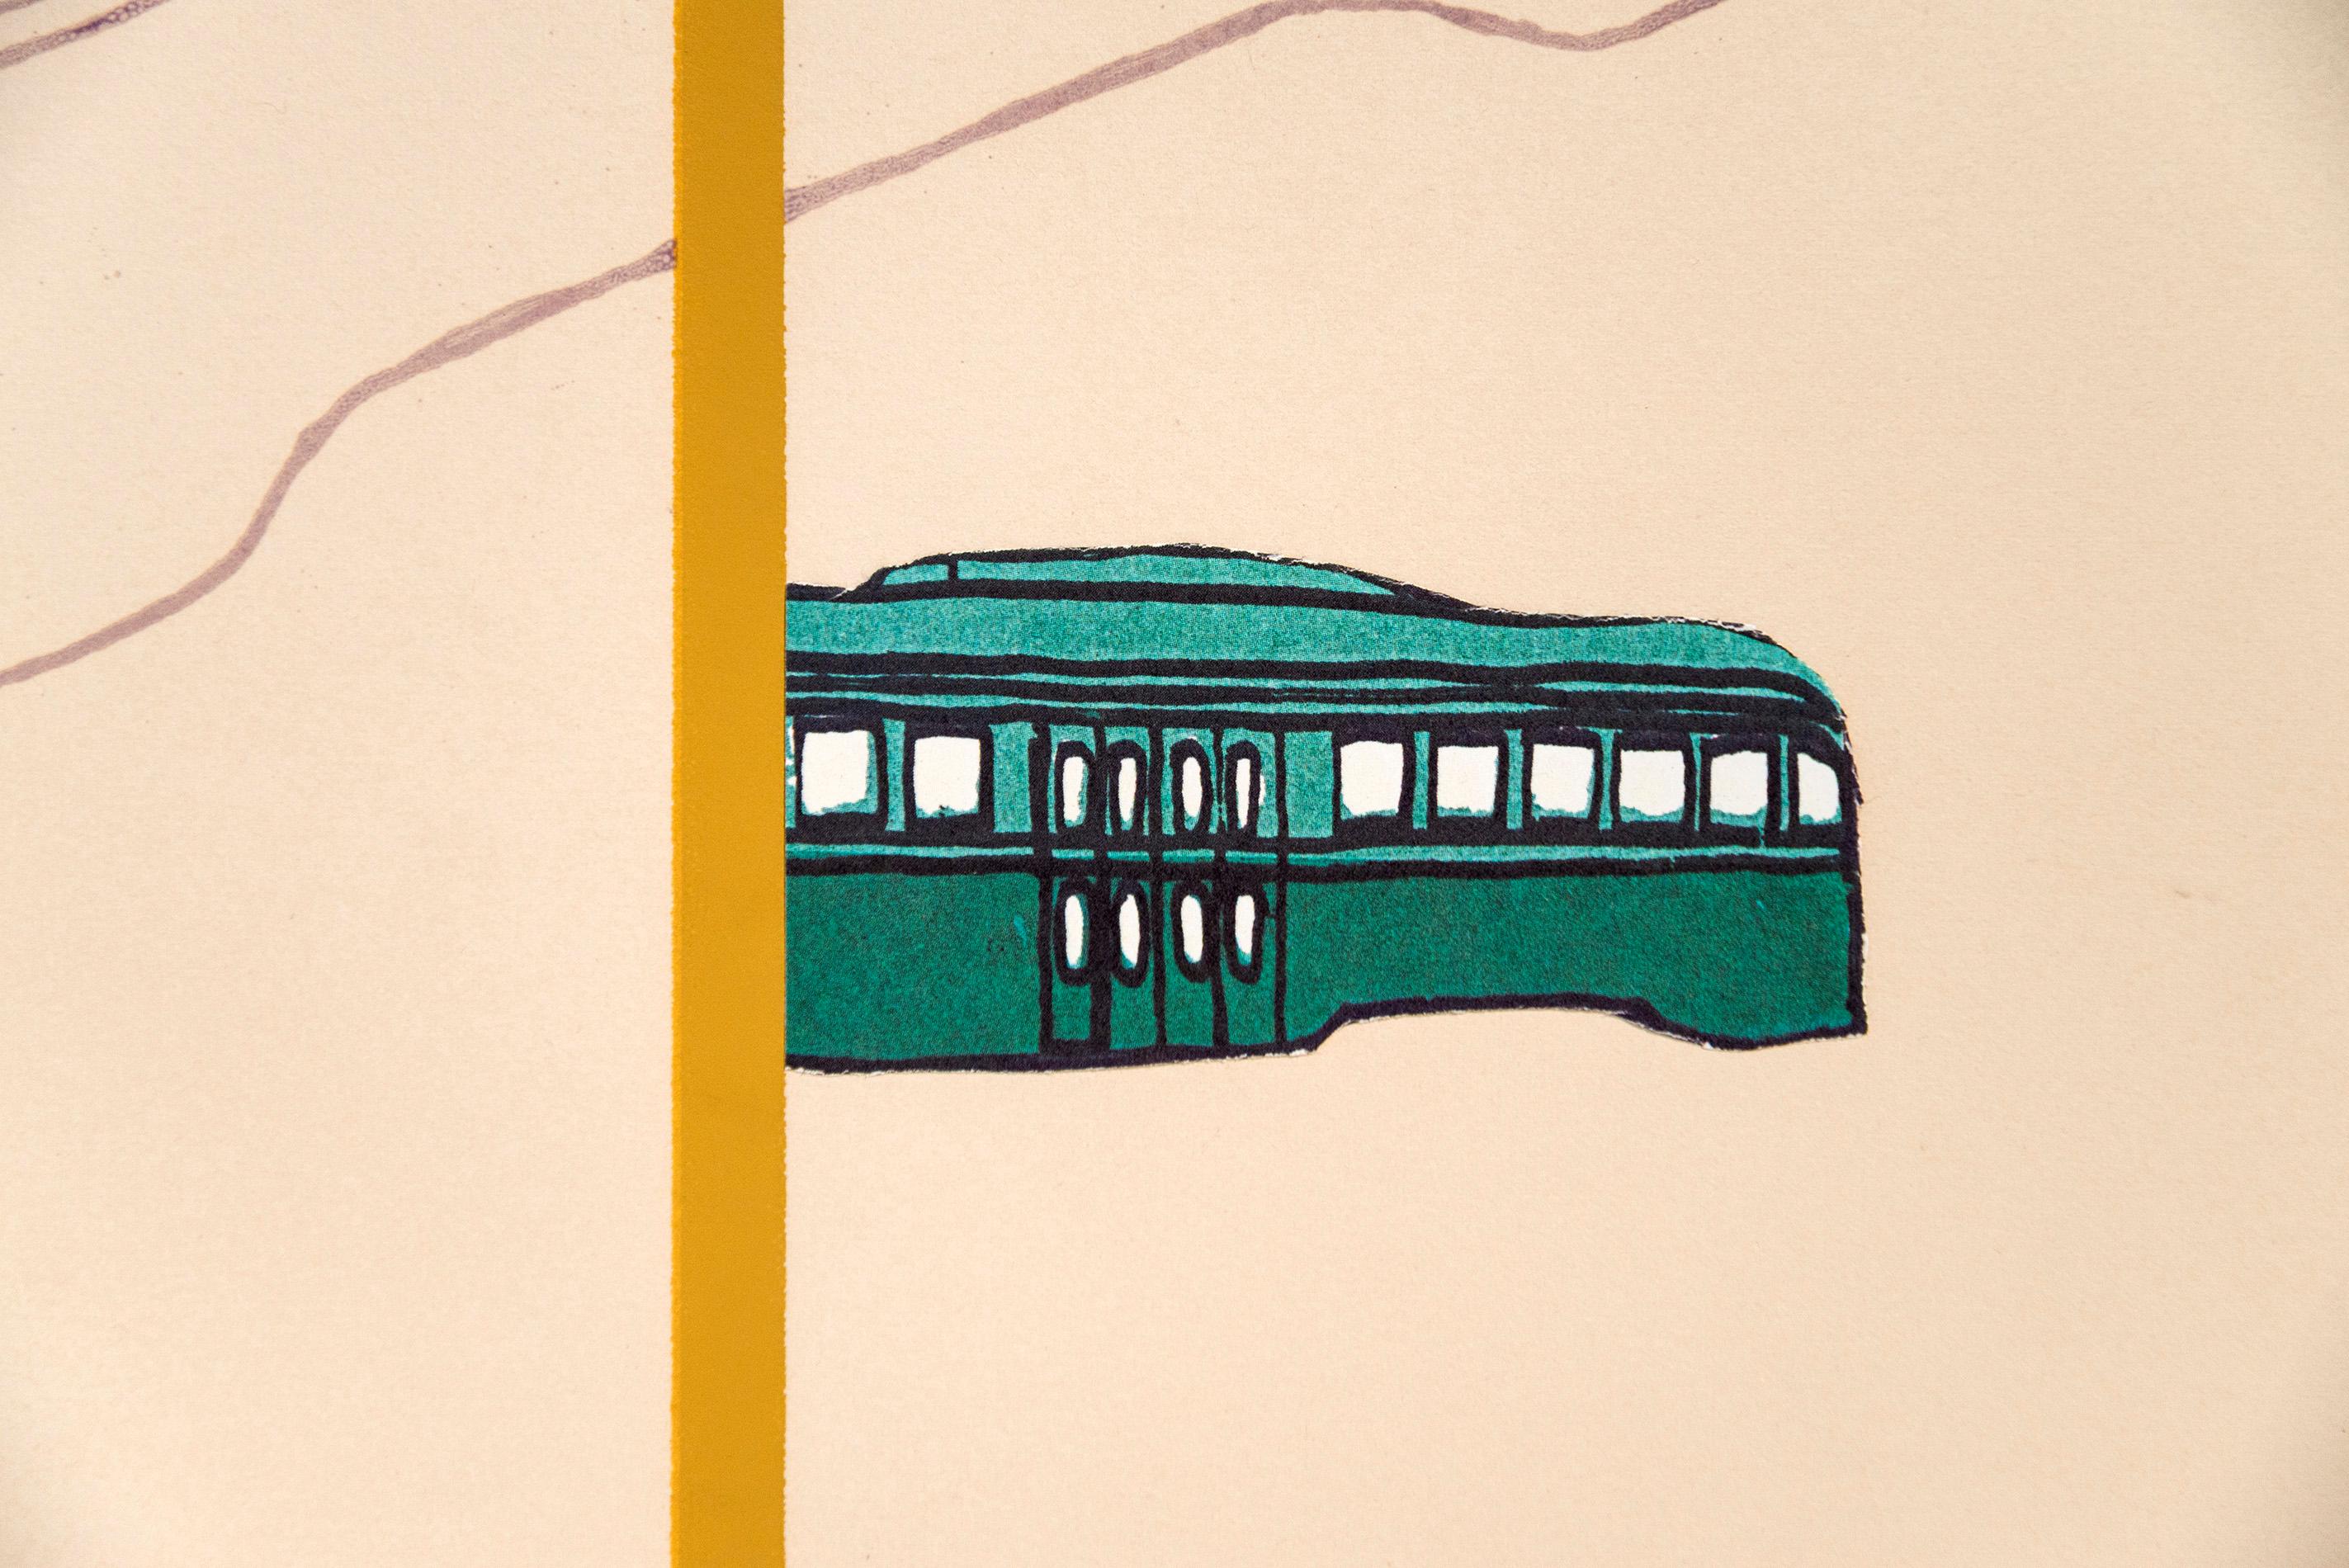 Streetcar Situation Green A/P 1/1 -figurative, playful, pop-art, limited edition - Contemporary Art by Charles Pachter